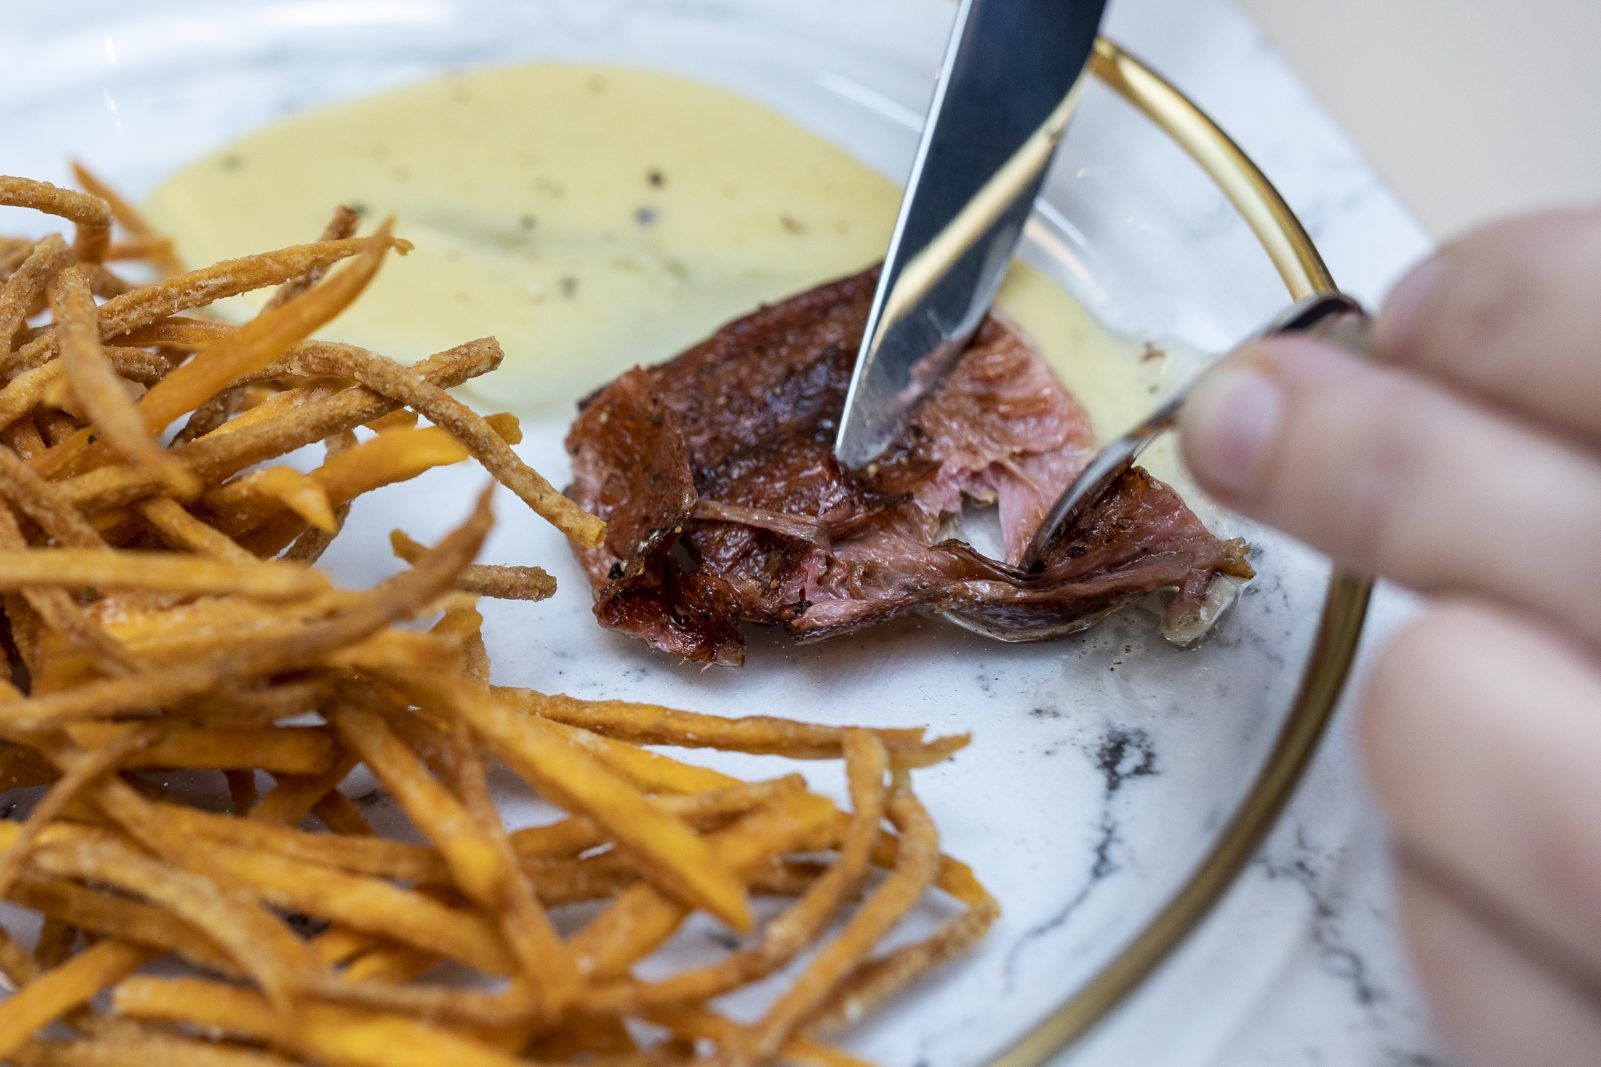 Aleph Farms' cultivated steak is meat, but is it Kosher? (Noi Einav/Aleph Farms)